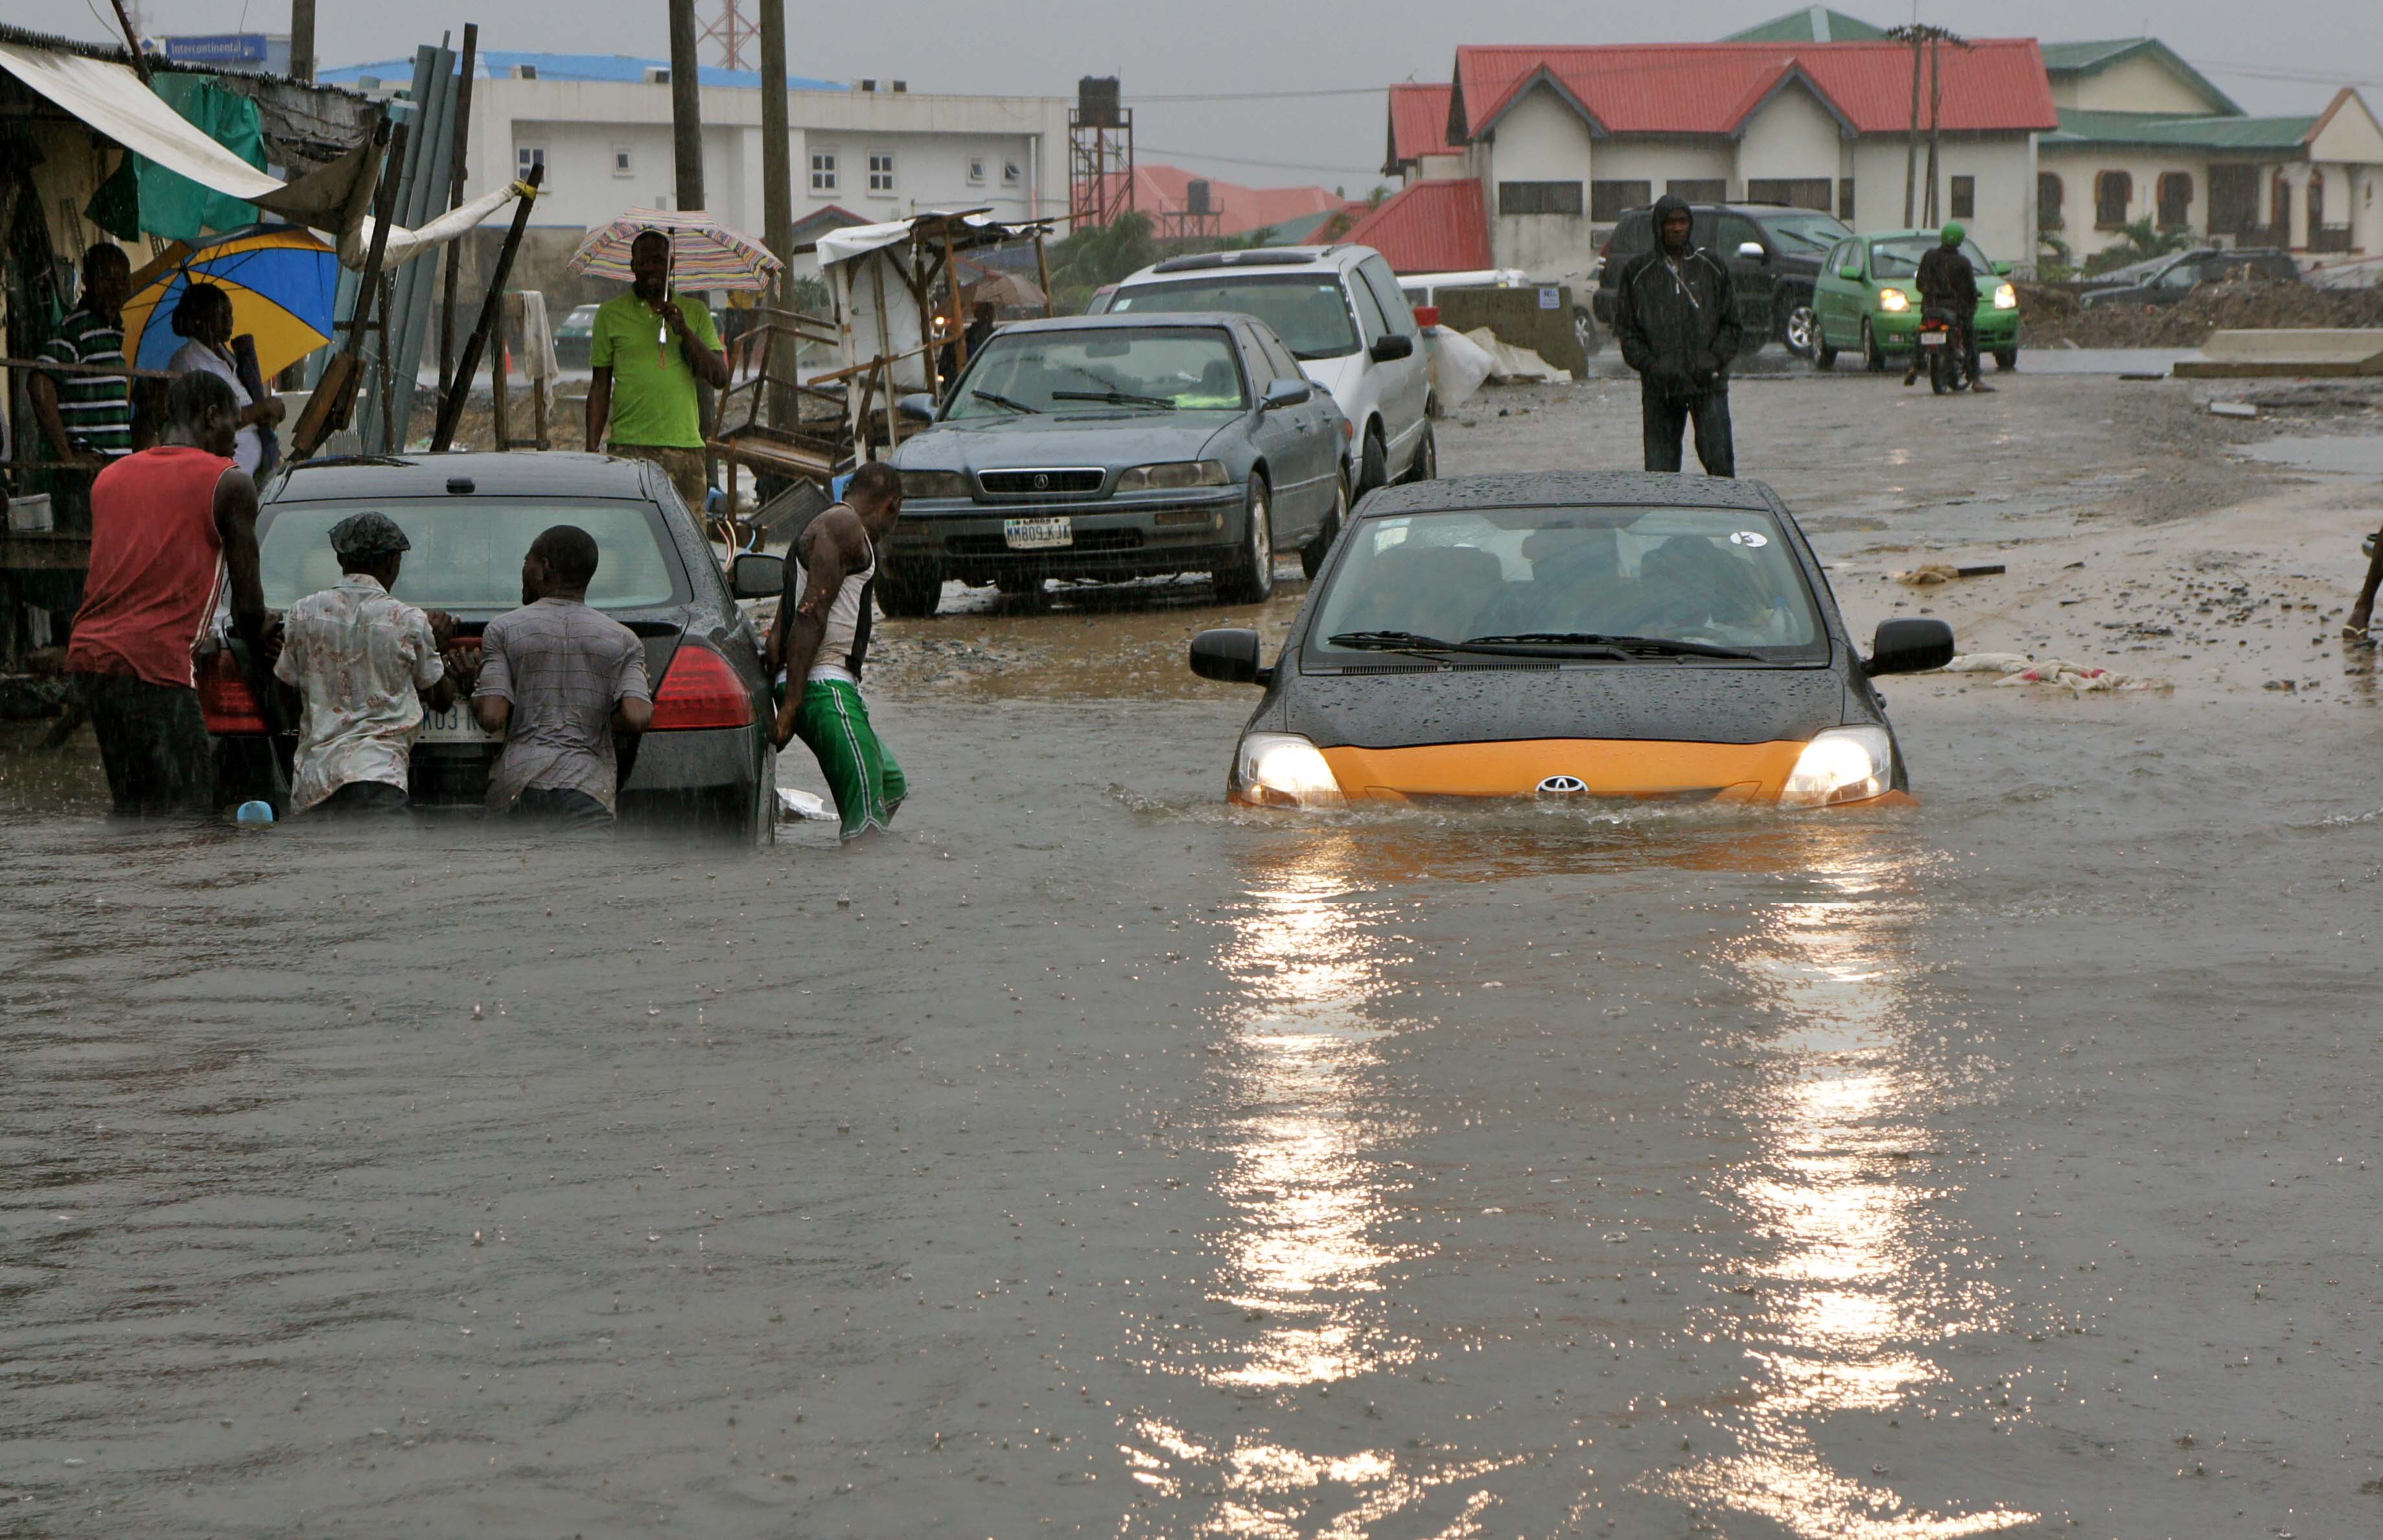 Lagos will be submerged by 2050